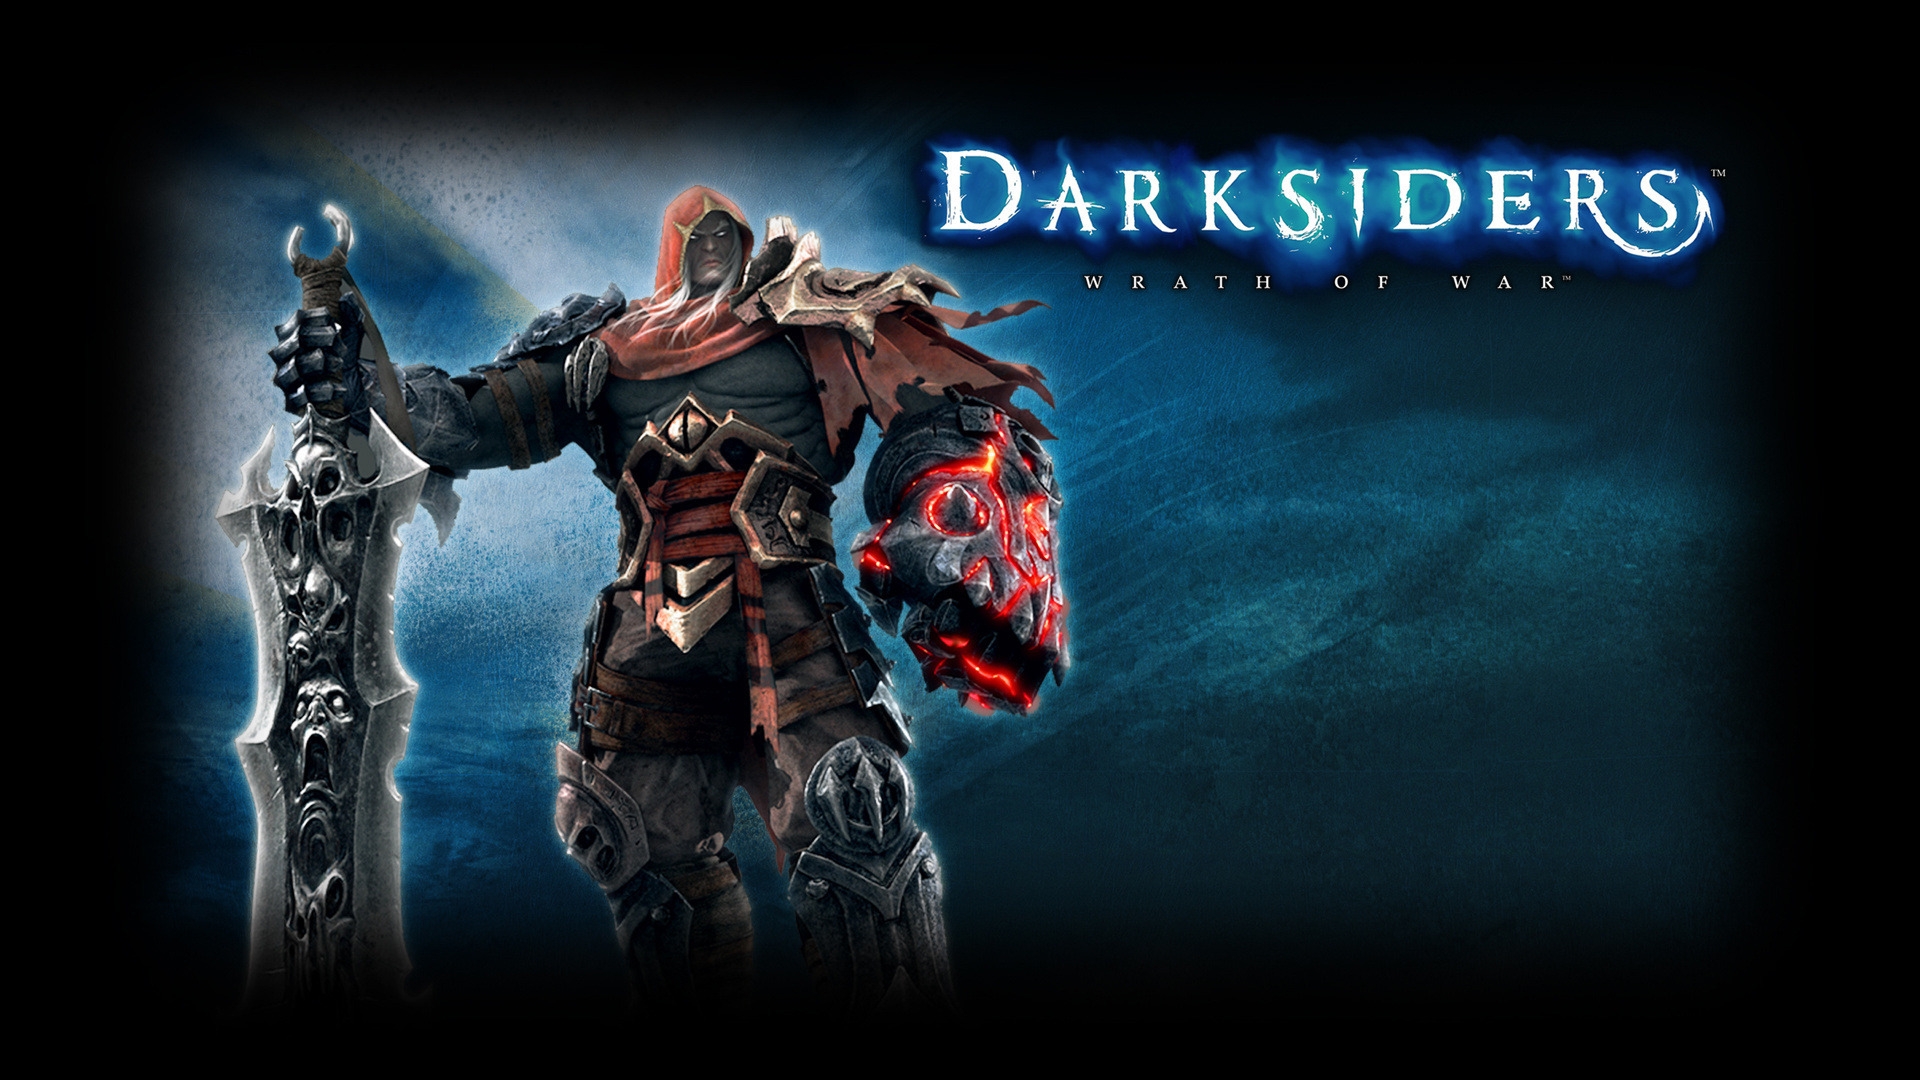 Darksiders Wrath of War Character for 1920 x 1080 HDTV 1080p resolution